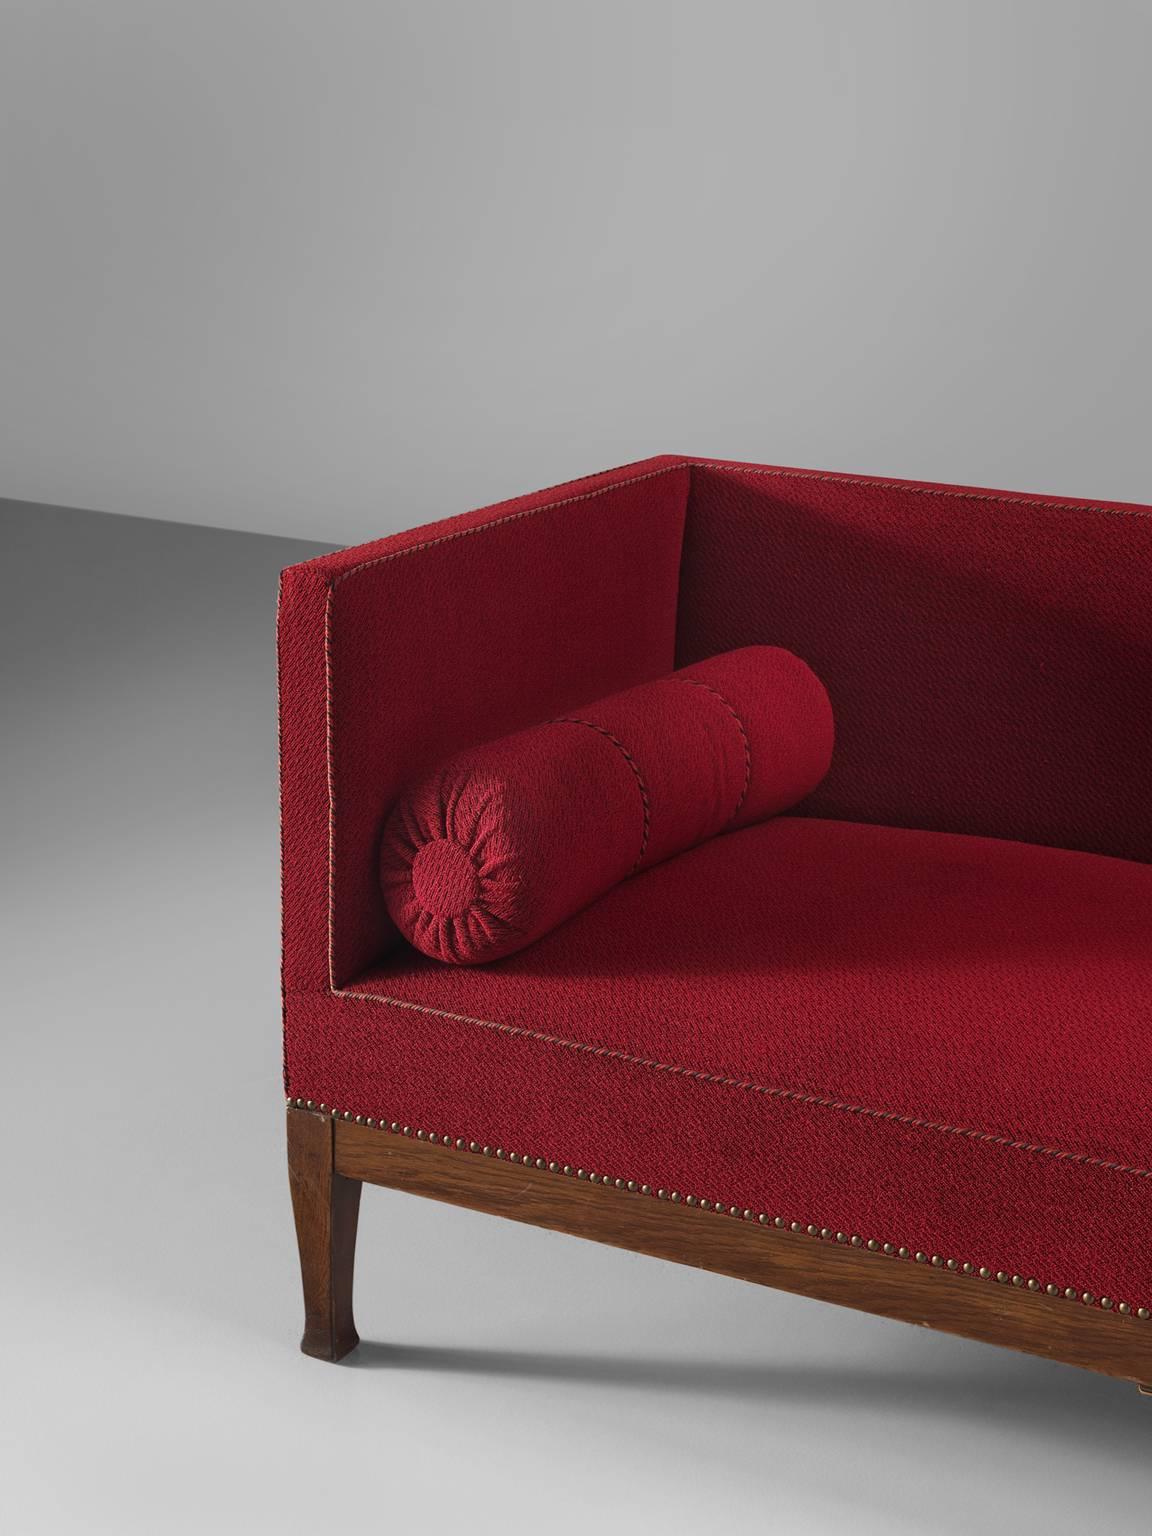 Mid-20th Century Early Swedish 'Grace' Chaise Longue in Deep Red